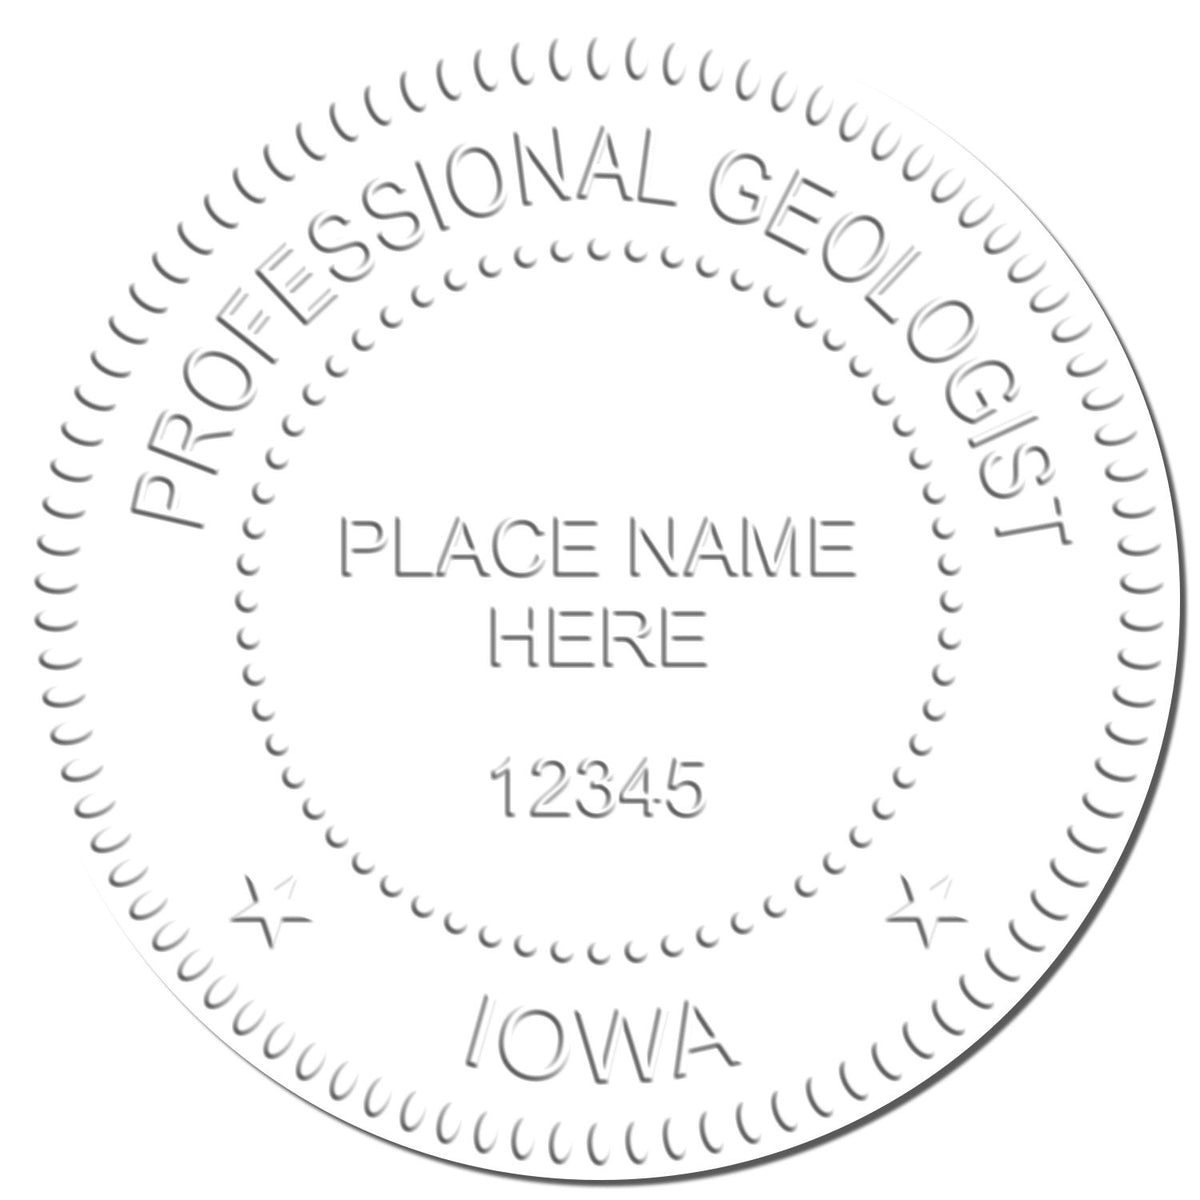 A photograph of the State of Iowa Extended Long Reach Geologist Seal stamp impression reveals a vivid, professional image of the on paper.